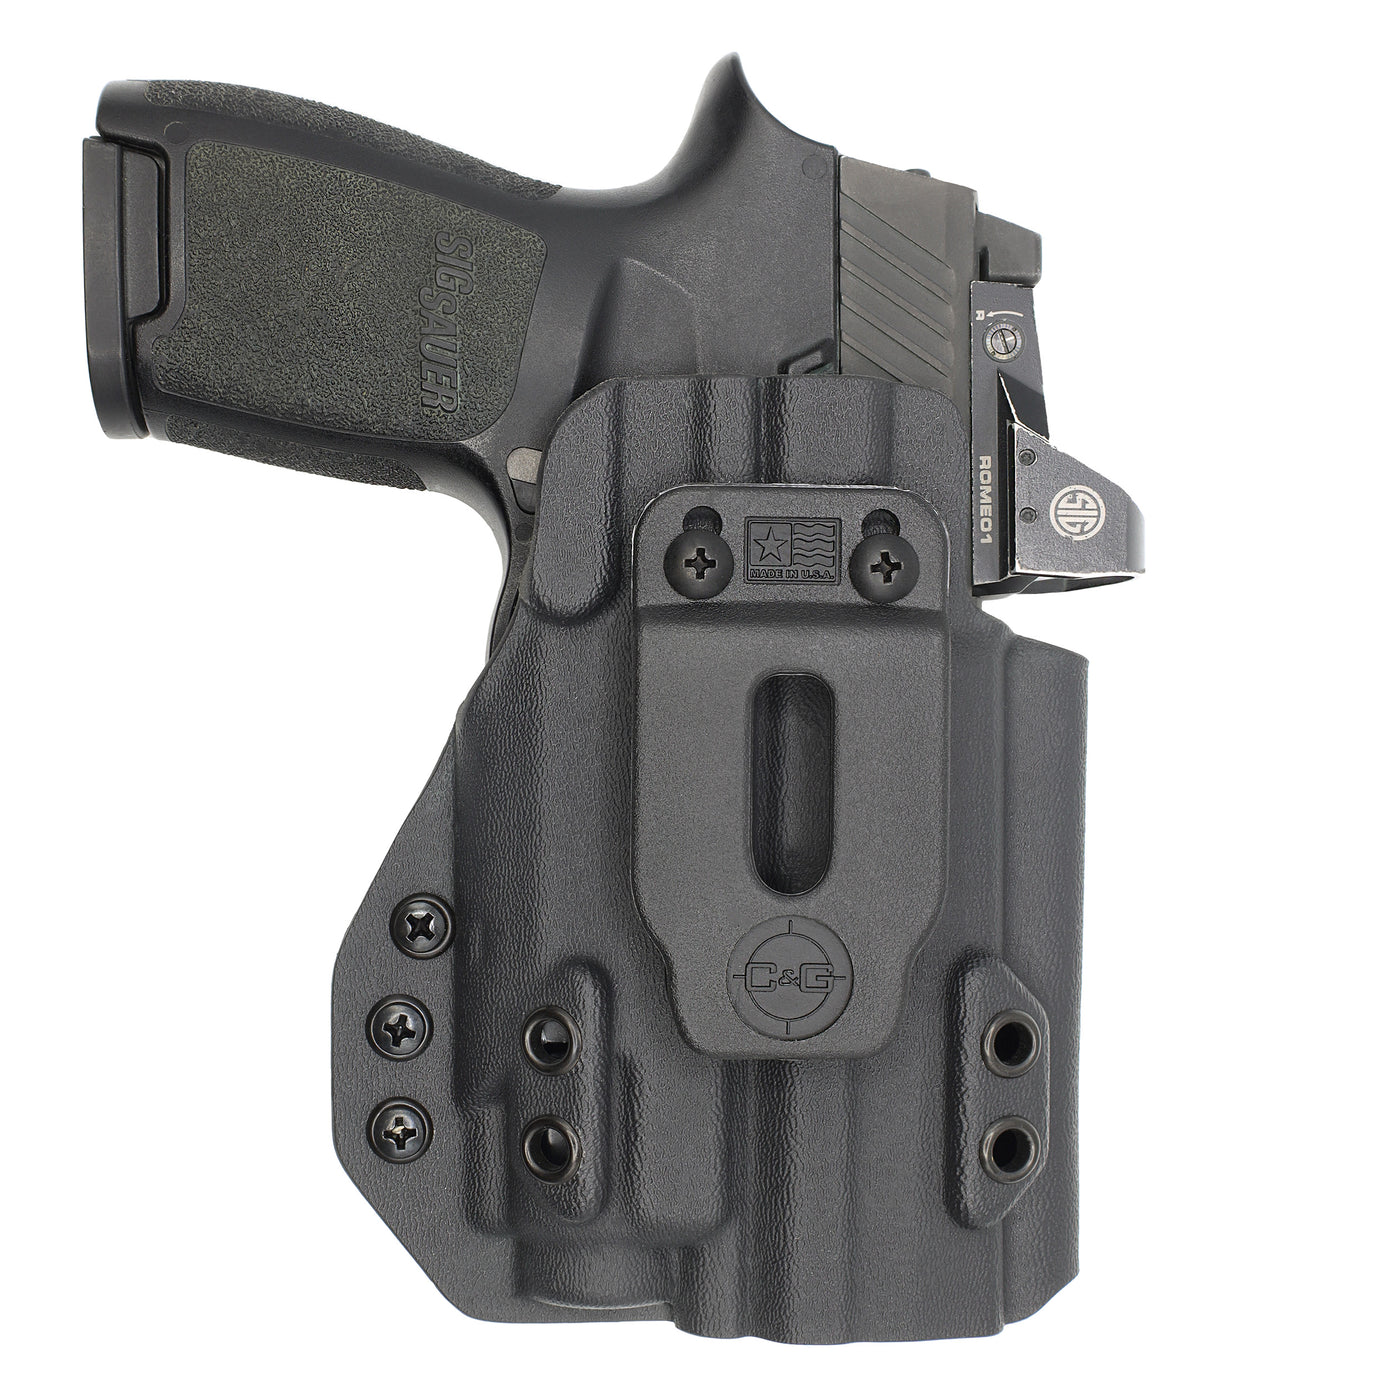 C&G Holsters custom IWB Tactical Springfield XDM streamlight TLR8 holstered